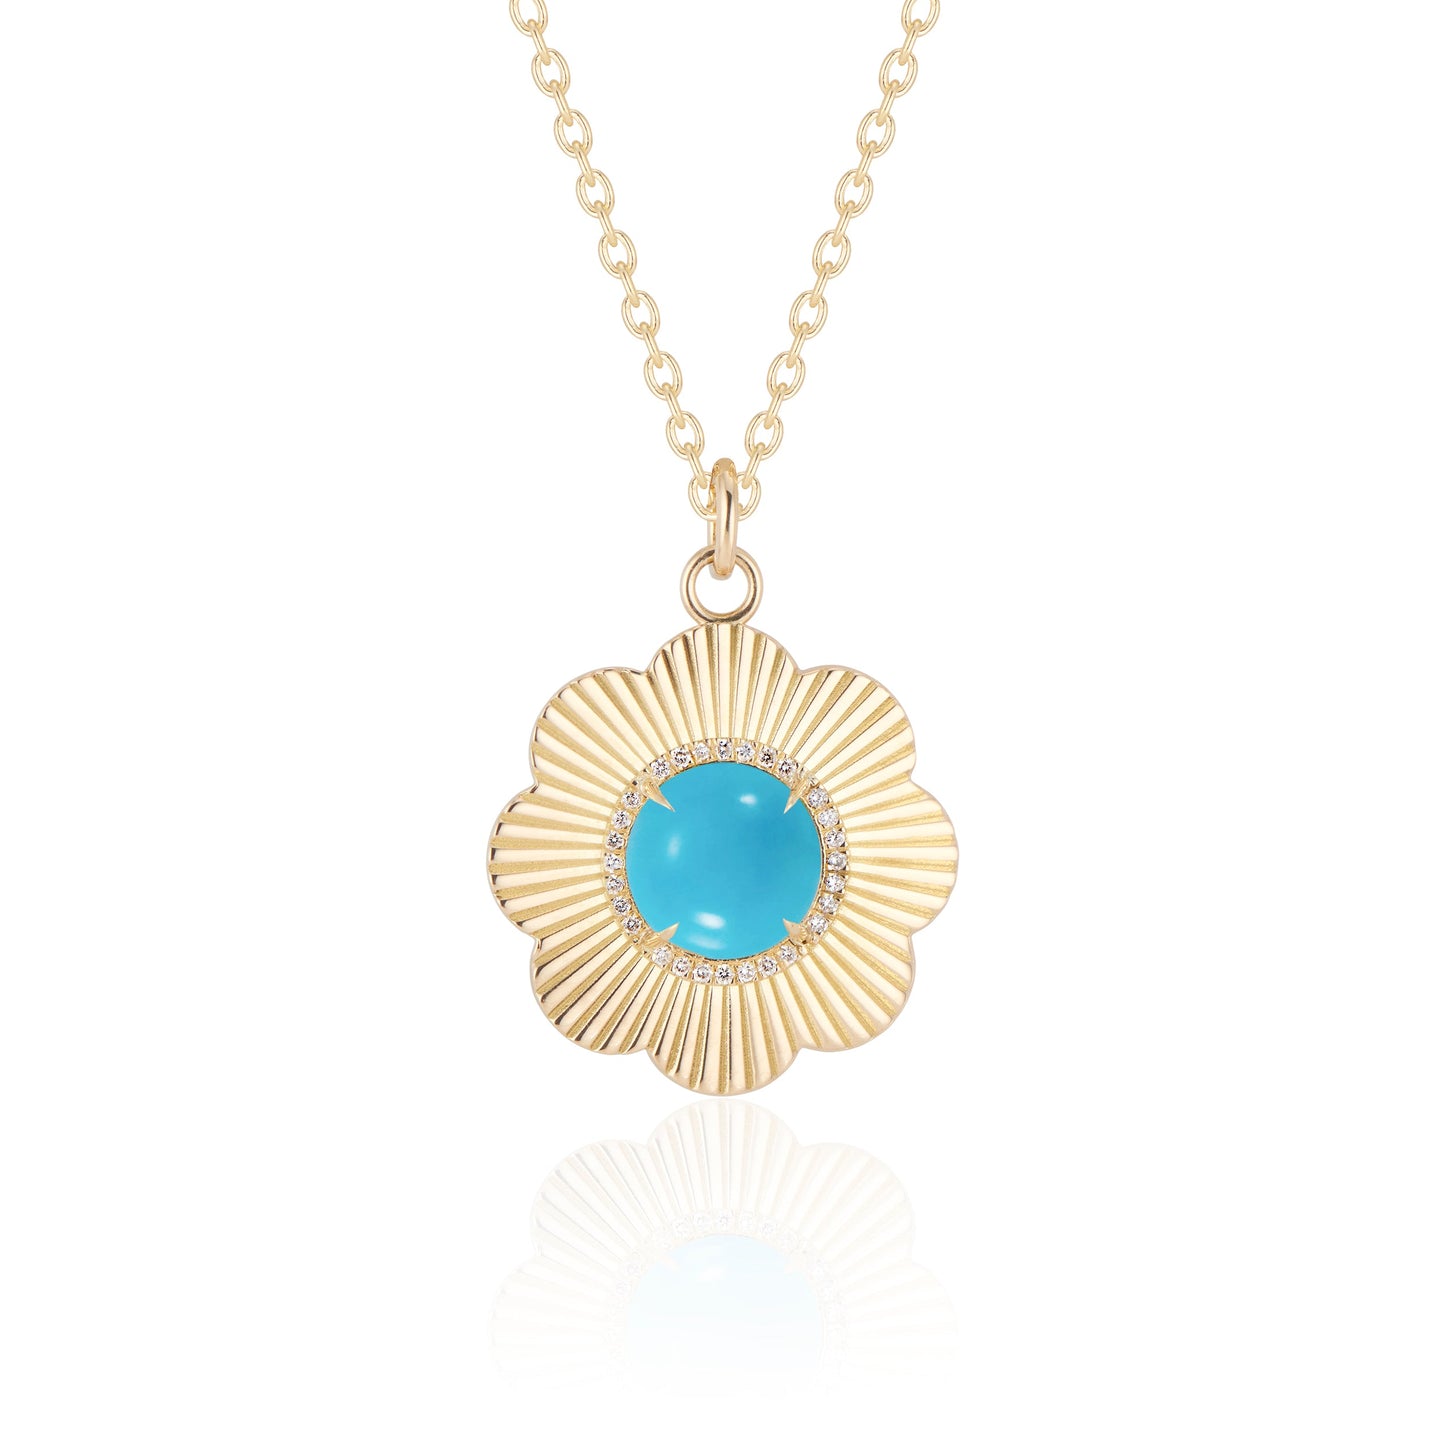 Revival Persephone Turquoise Pendant Necklace with Diamonds